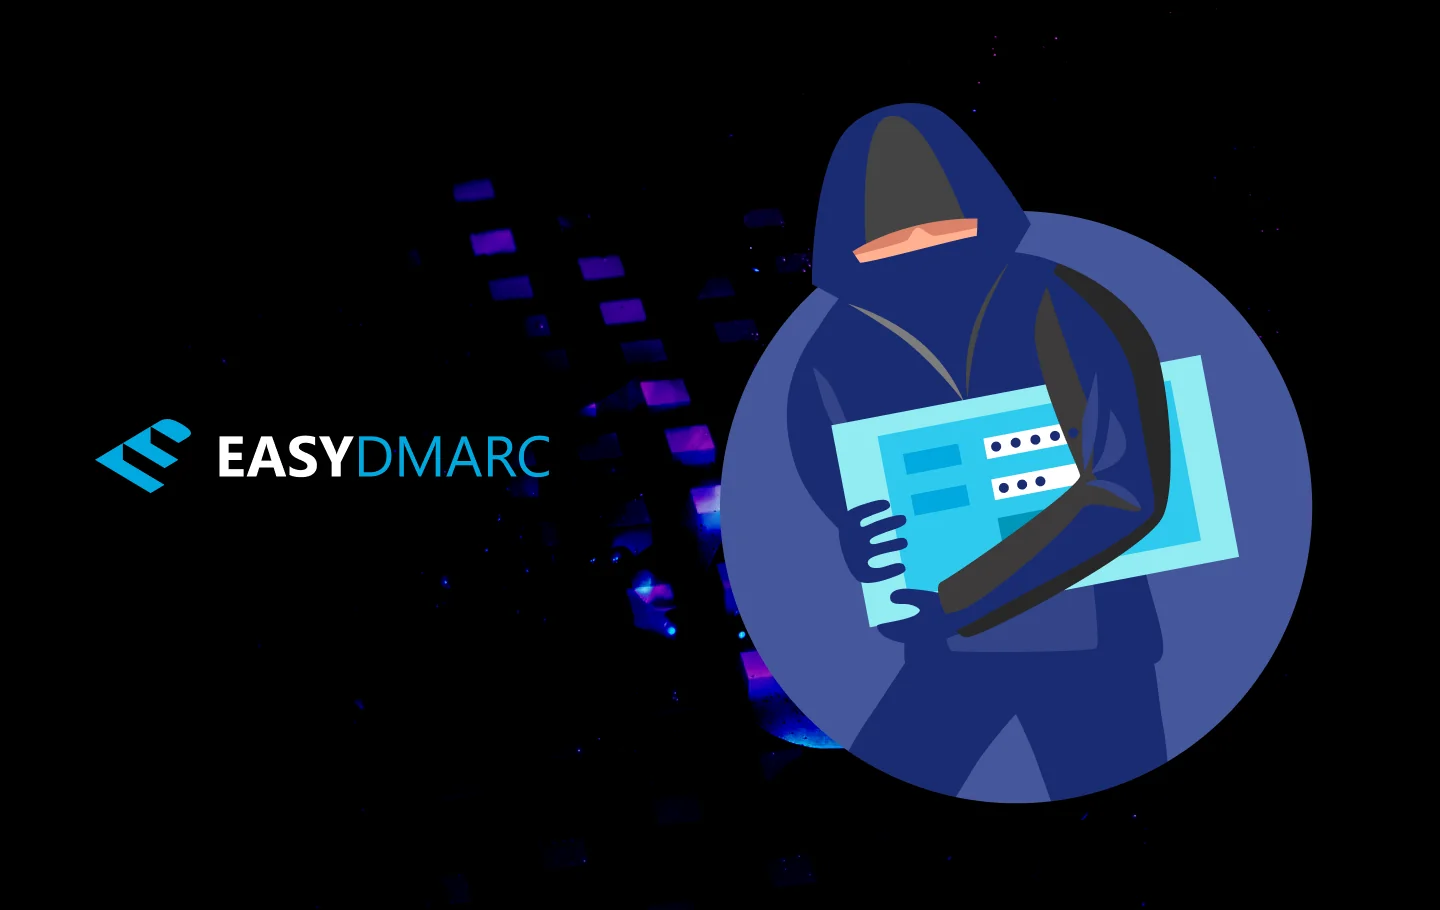 A person's image holing some square object on a dark background,with the EasyDMARC logo on the left side